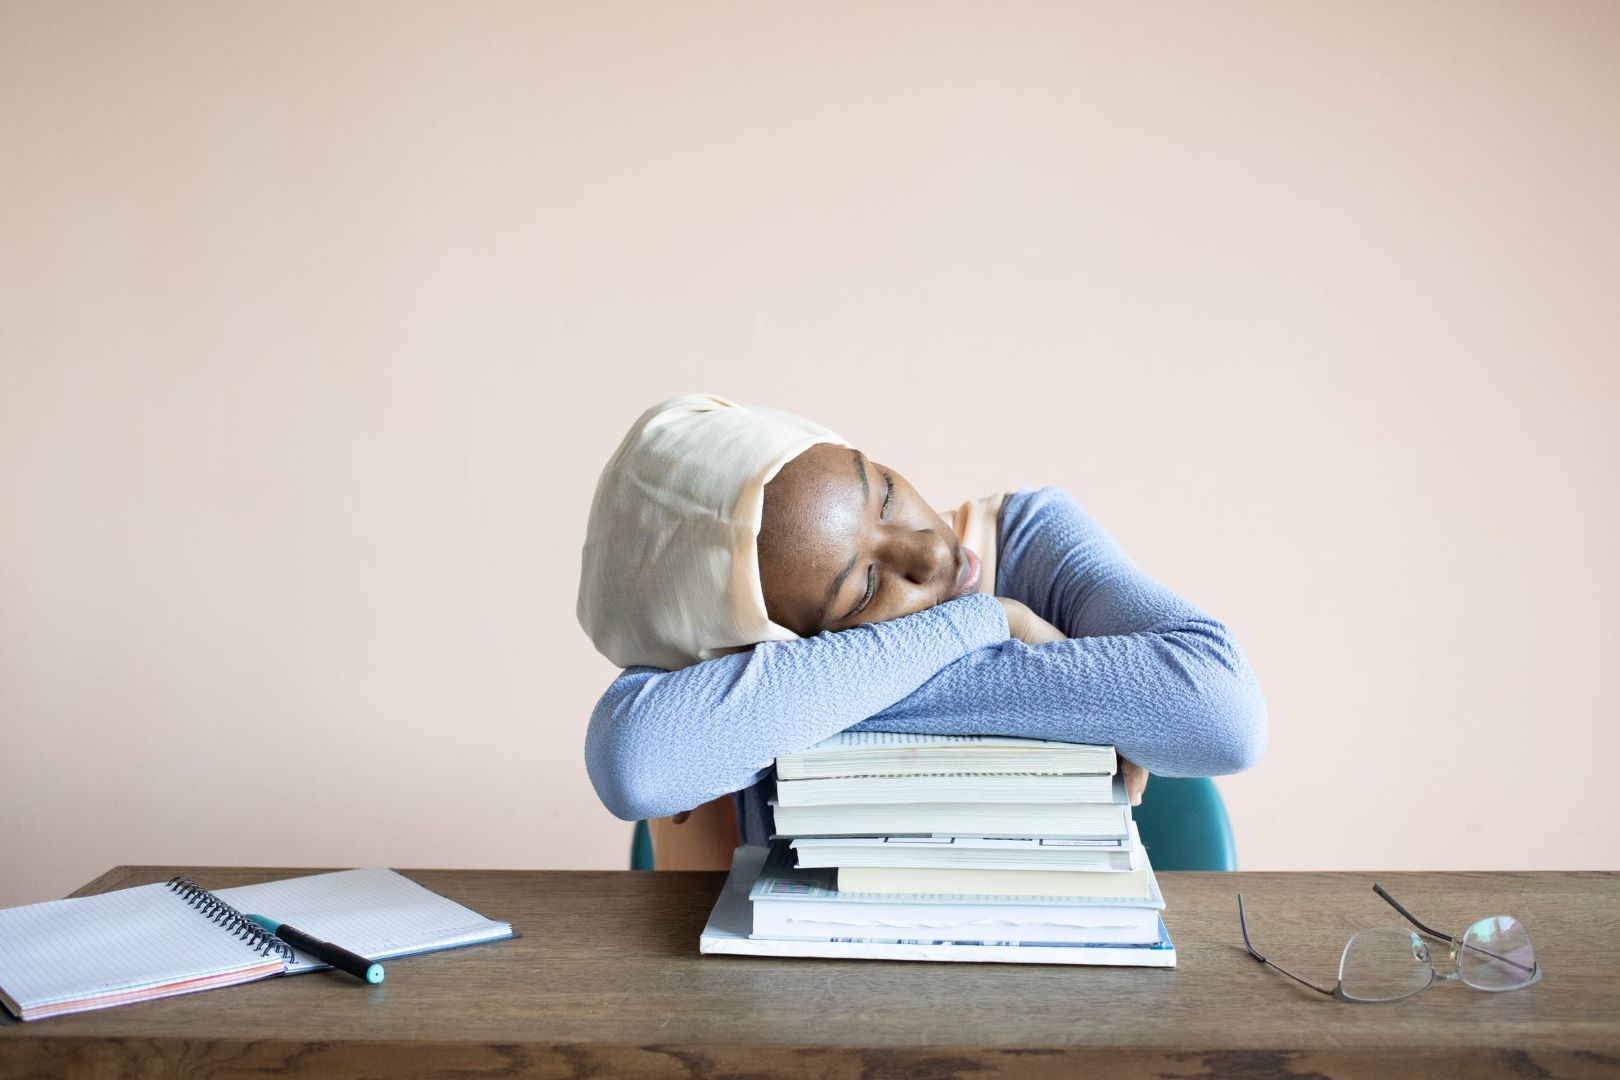 Tired of exams? Here are some tips and tricks to give you the energy to get through them